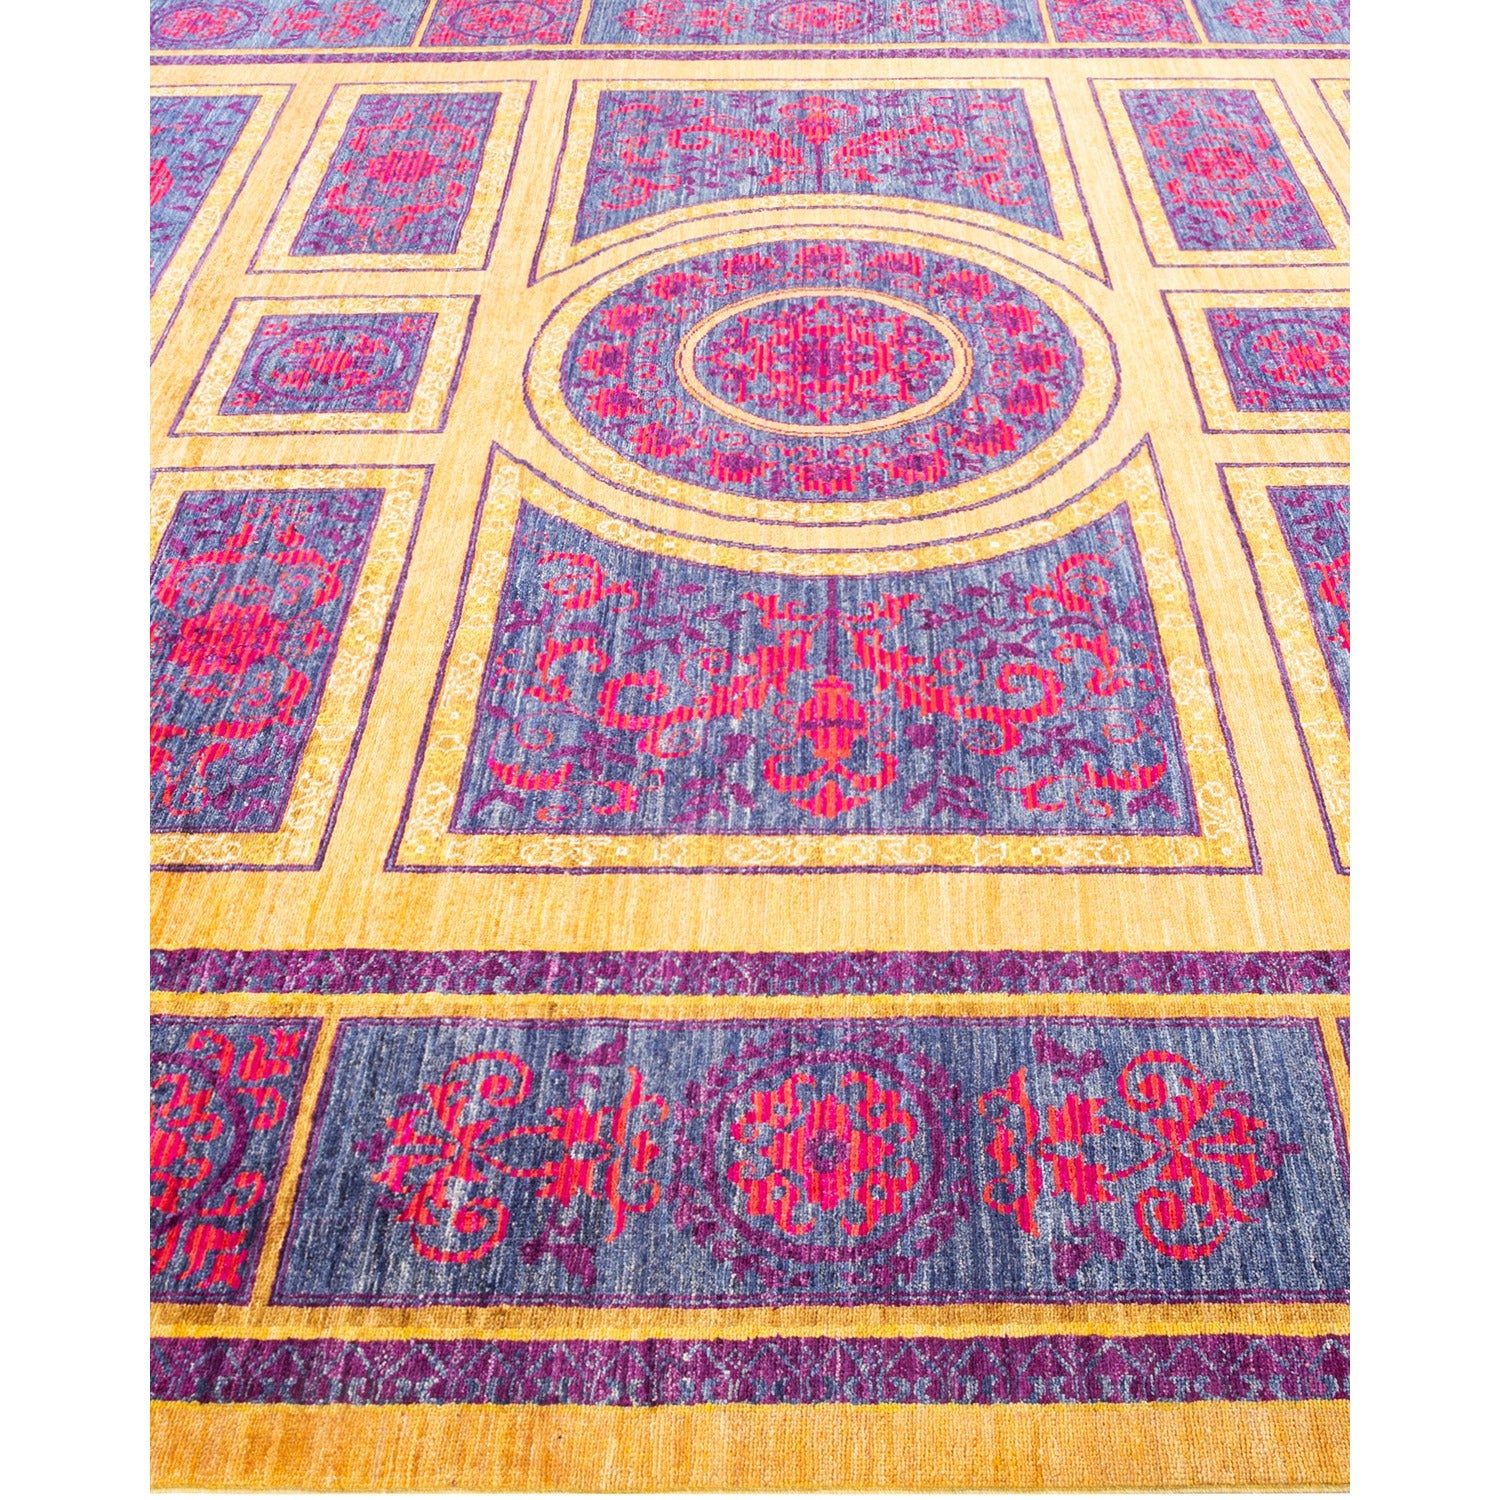 Vibrant and intricate patterned carpet with Eastern influences and fine craftsmanship.